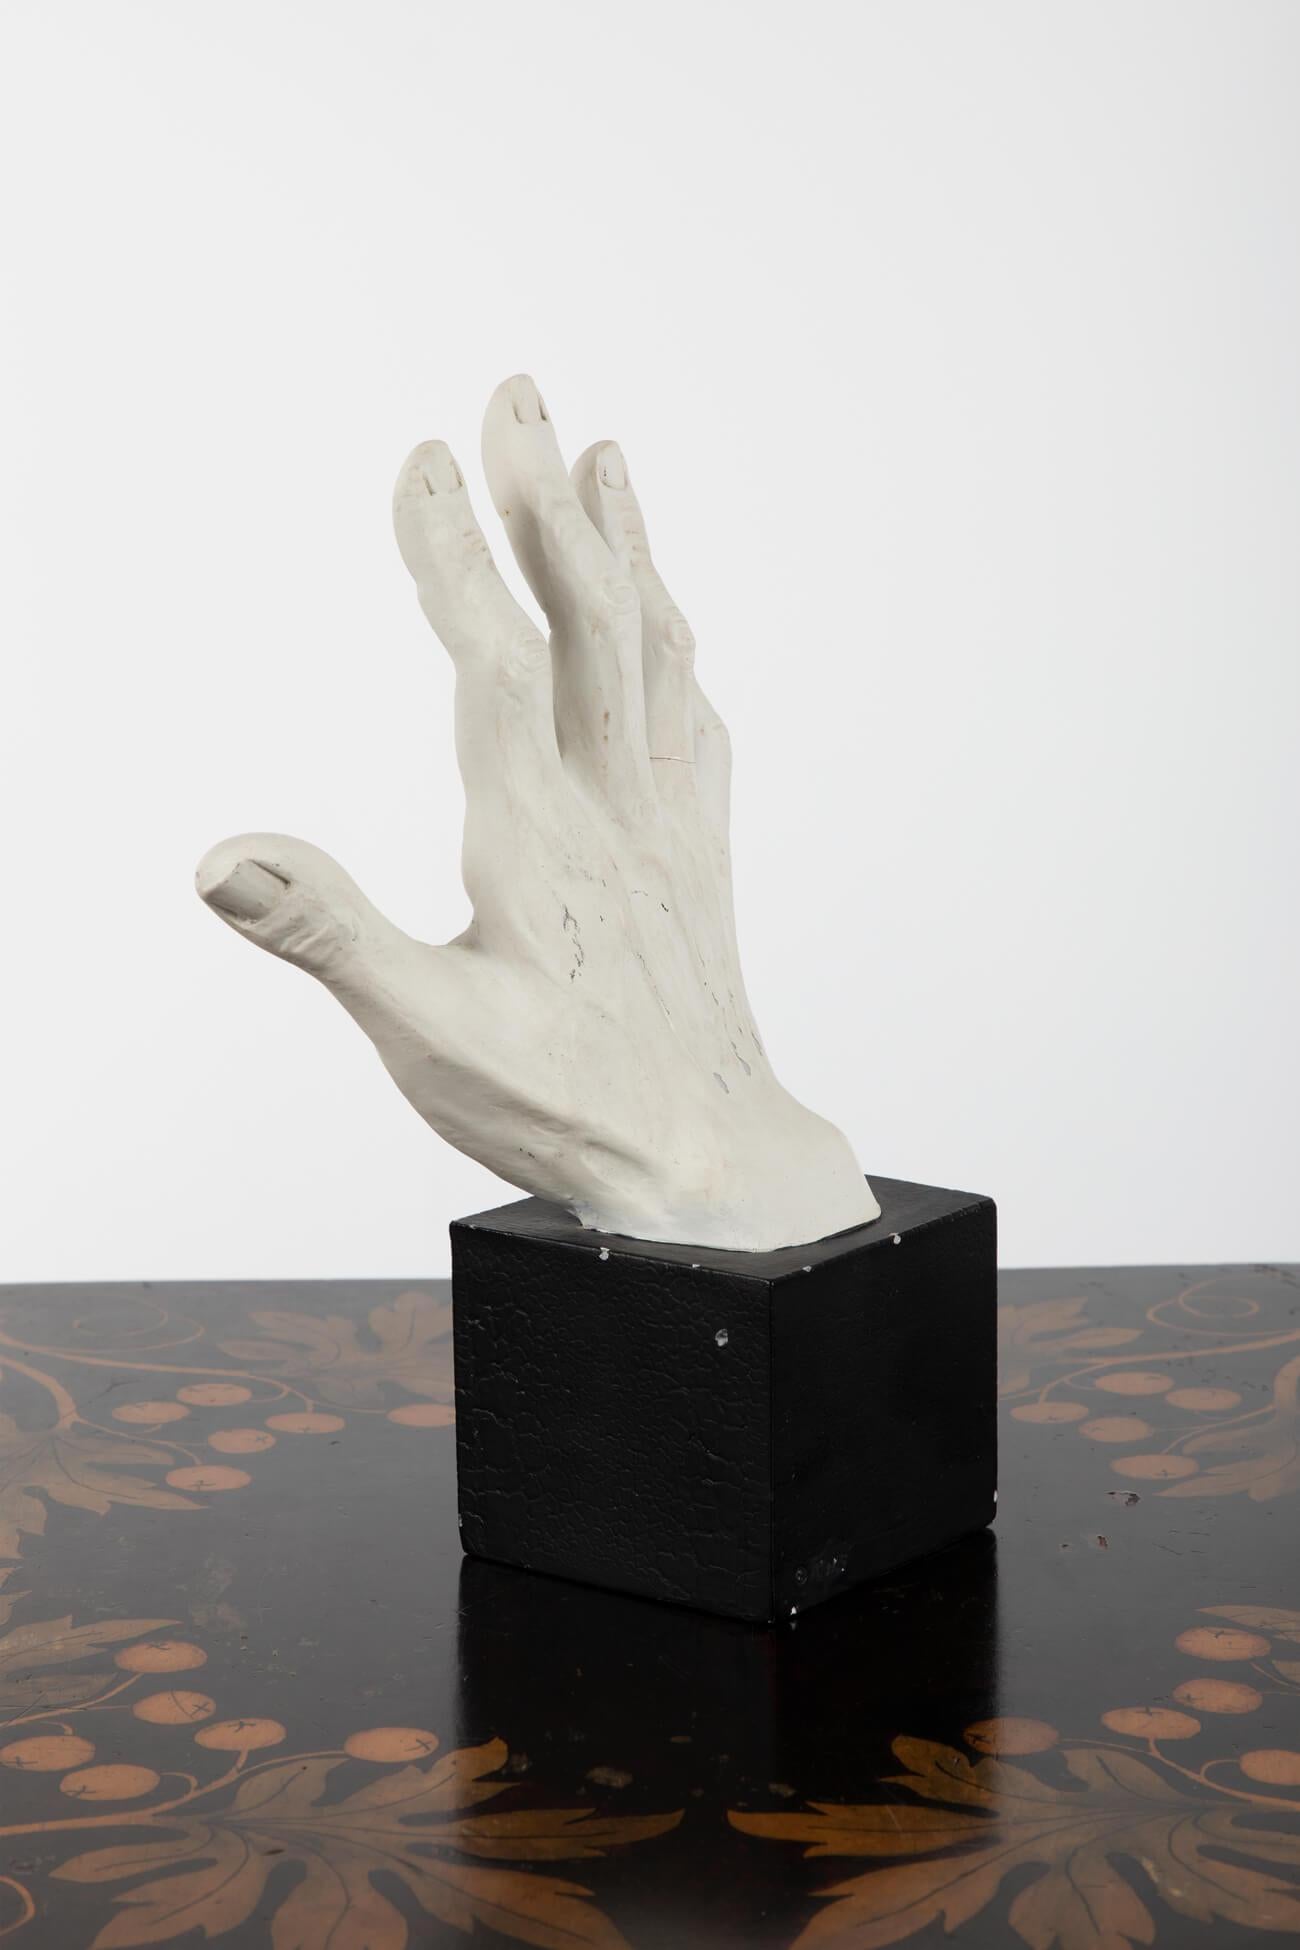 Anatomical plaster study of a man’s hand, sitting on an oak plinth base. With wonderful definition to the fingers and palm. 
British, early 20th century.

Additional information:
H 27 cm (H 10.6 inches)
W 15 cm (W 5.9 inches)
D 9 cm (D 3.5